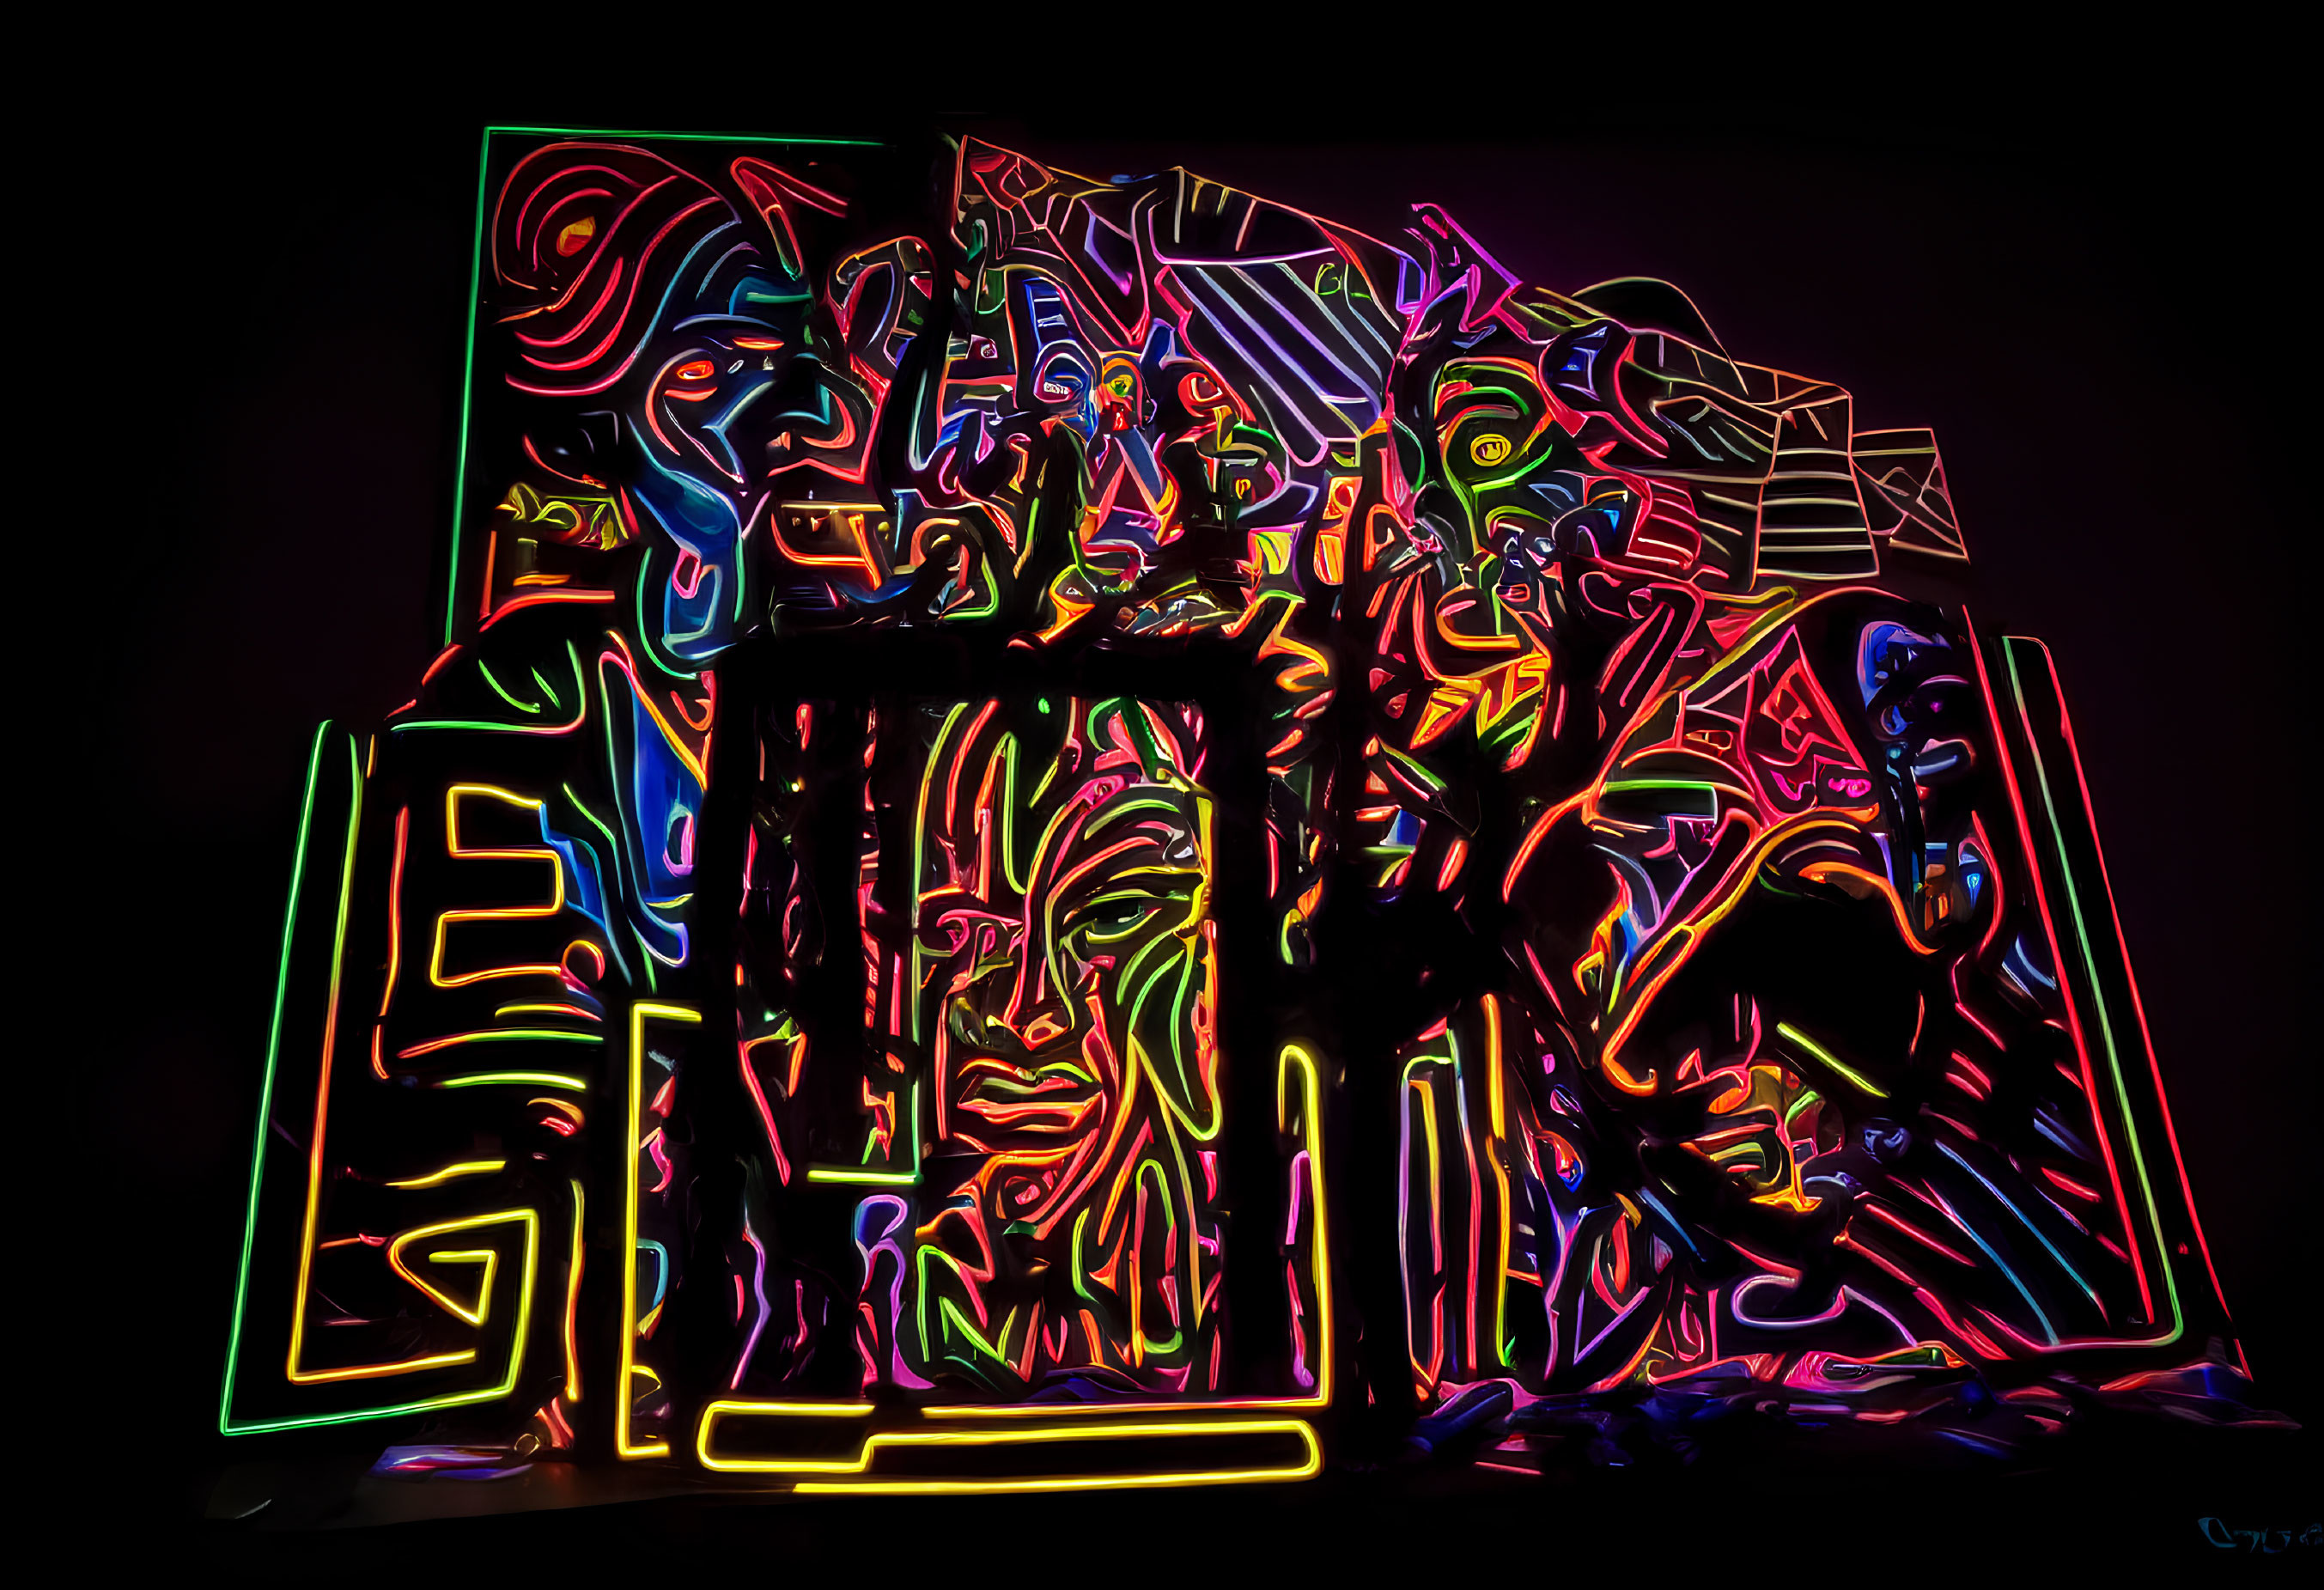 Abstract Neon Light Installation with Chaotic Lines on Dark Background